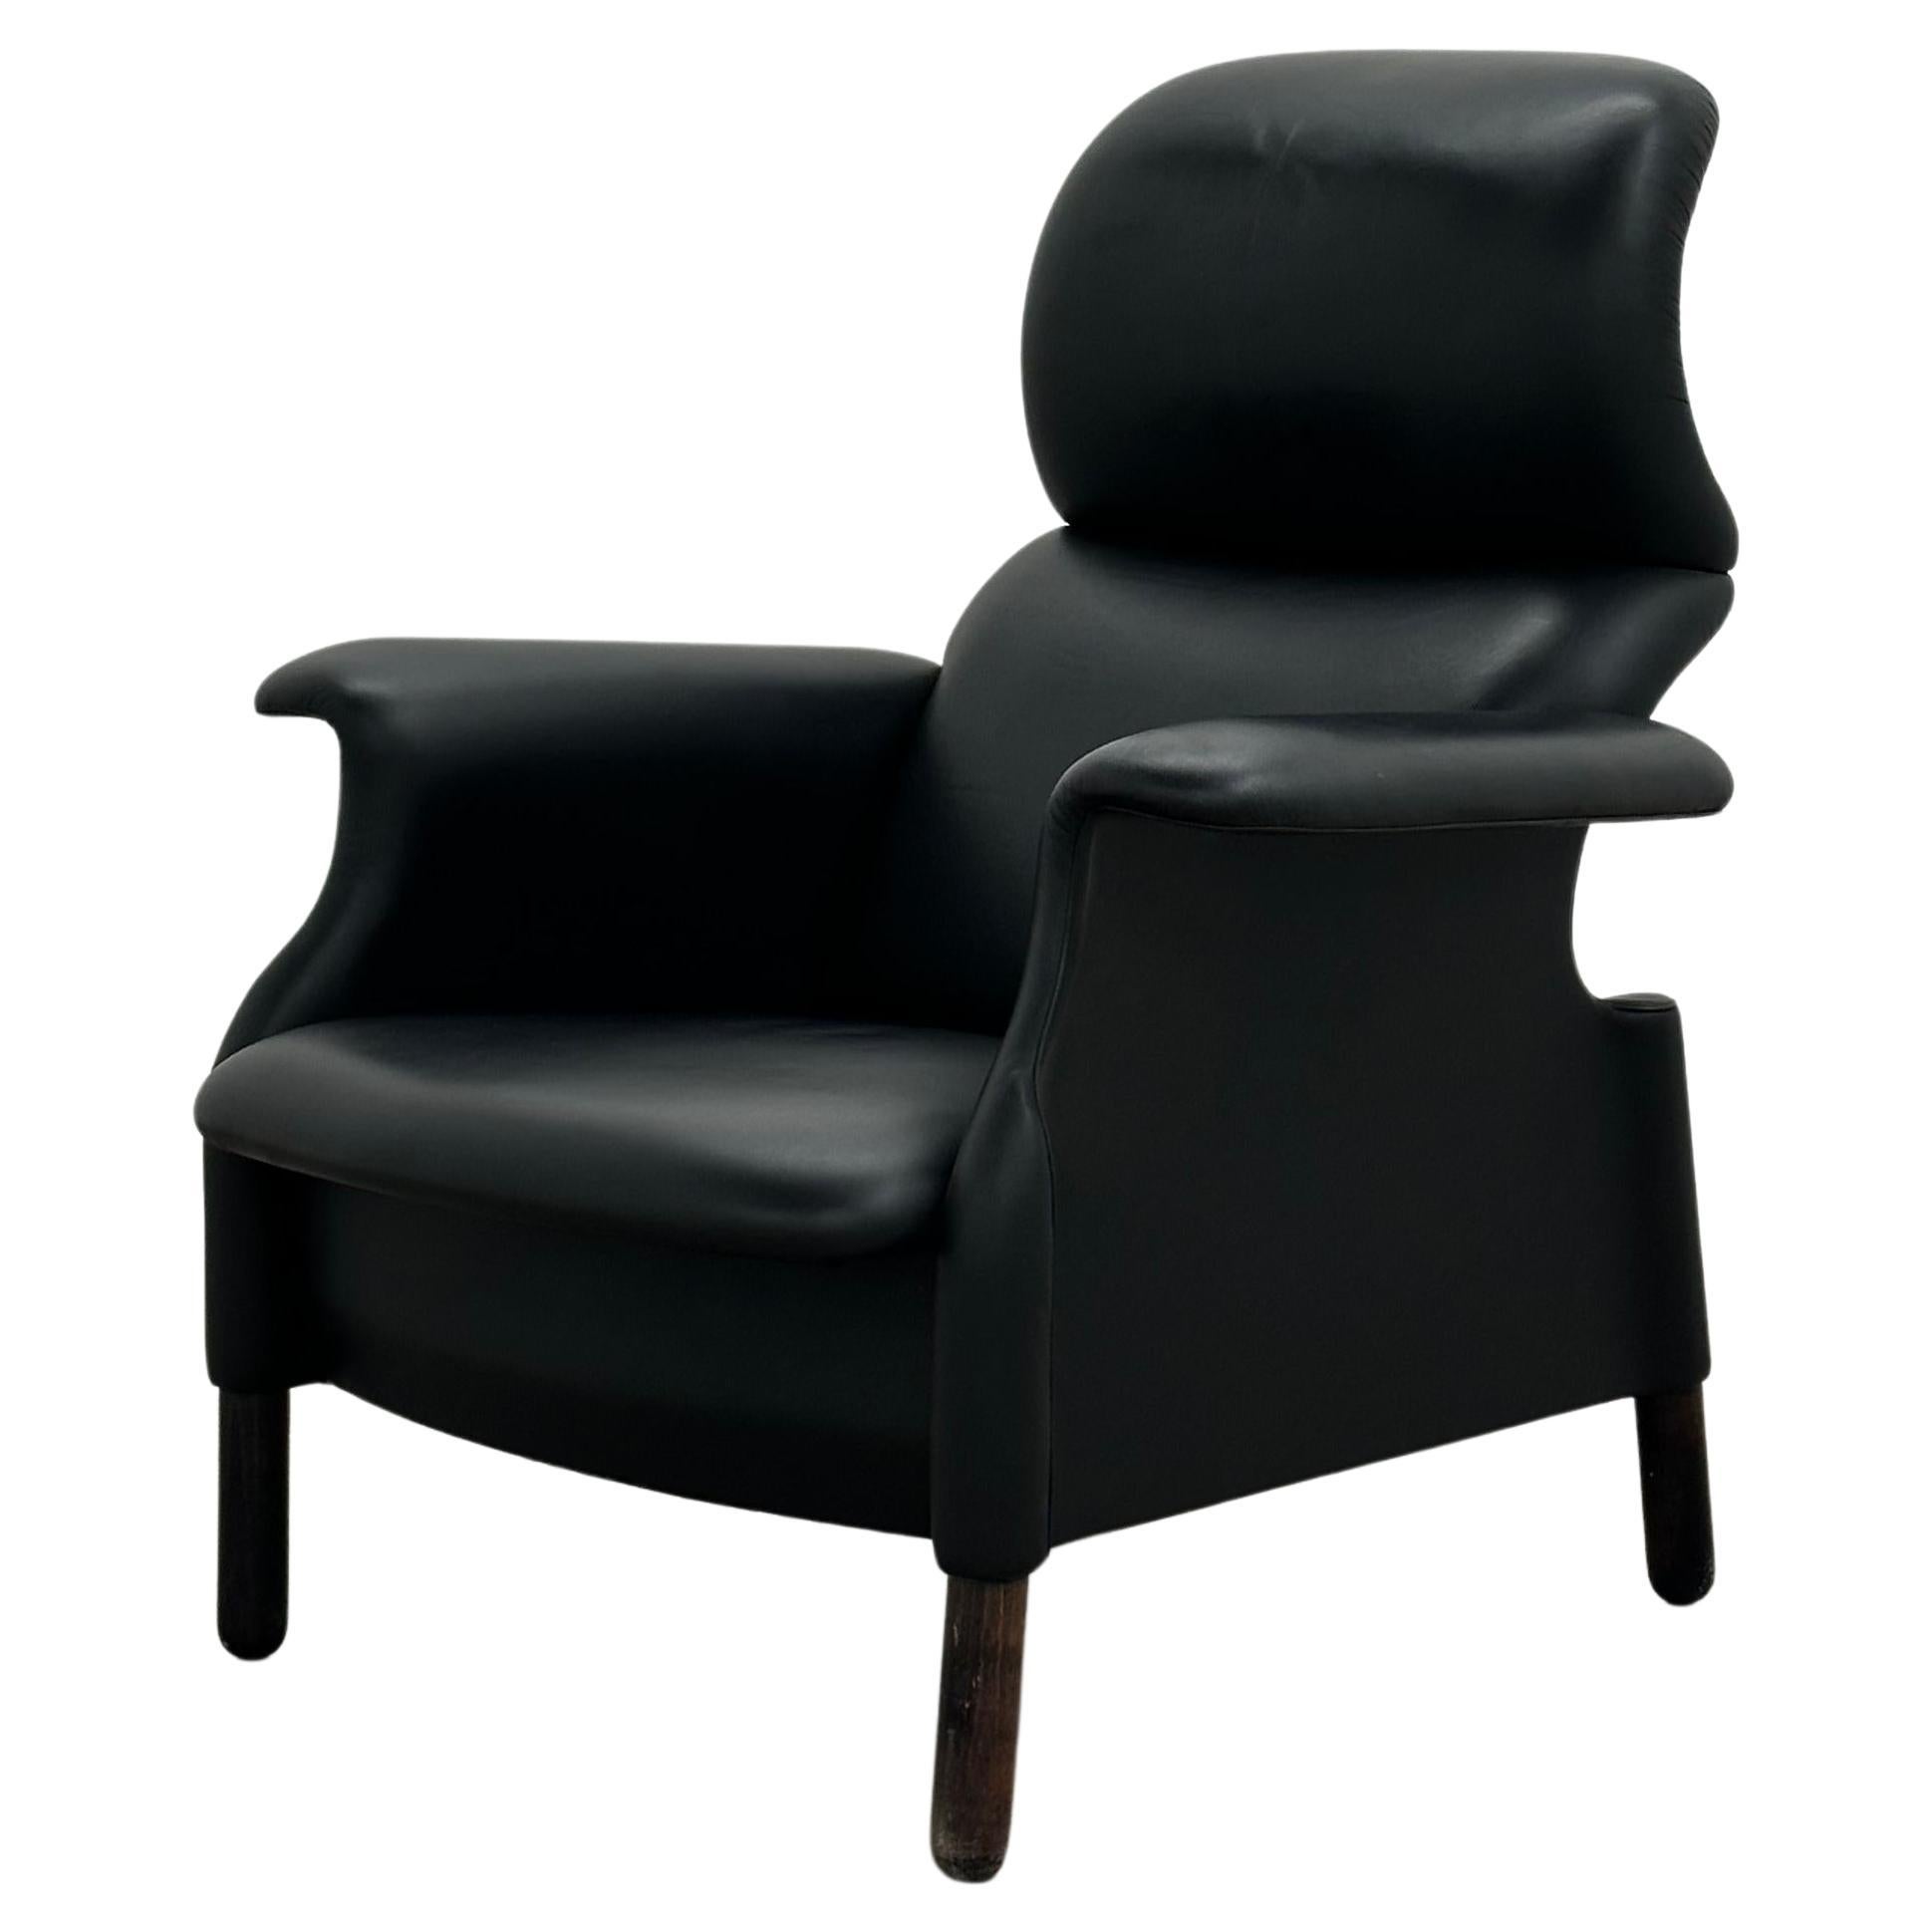 Achille & Pier Giacomo black leather "San Luca" lounge chair for Bernini, Italy For Sale